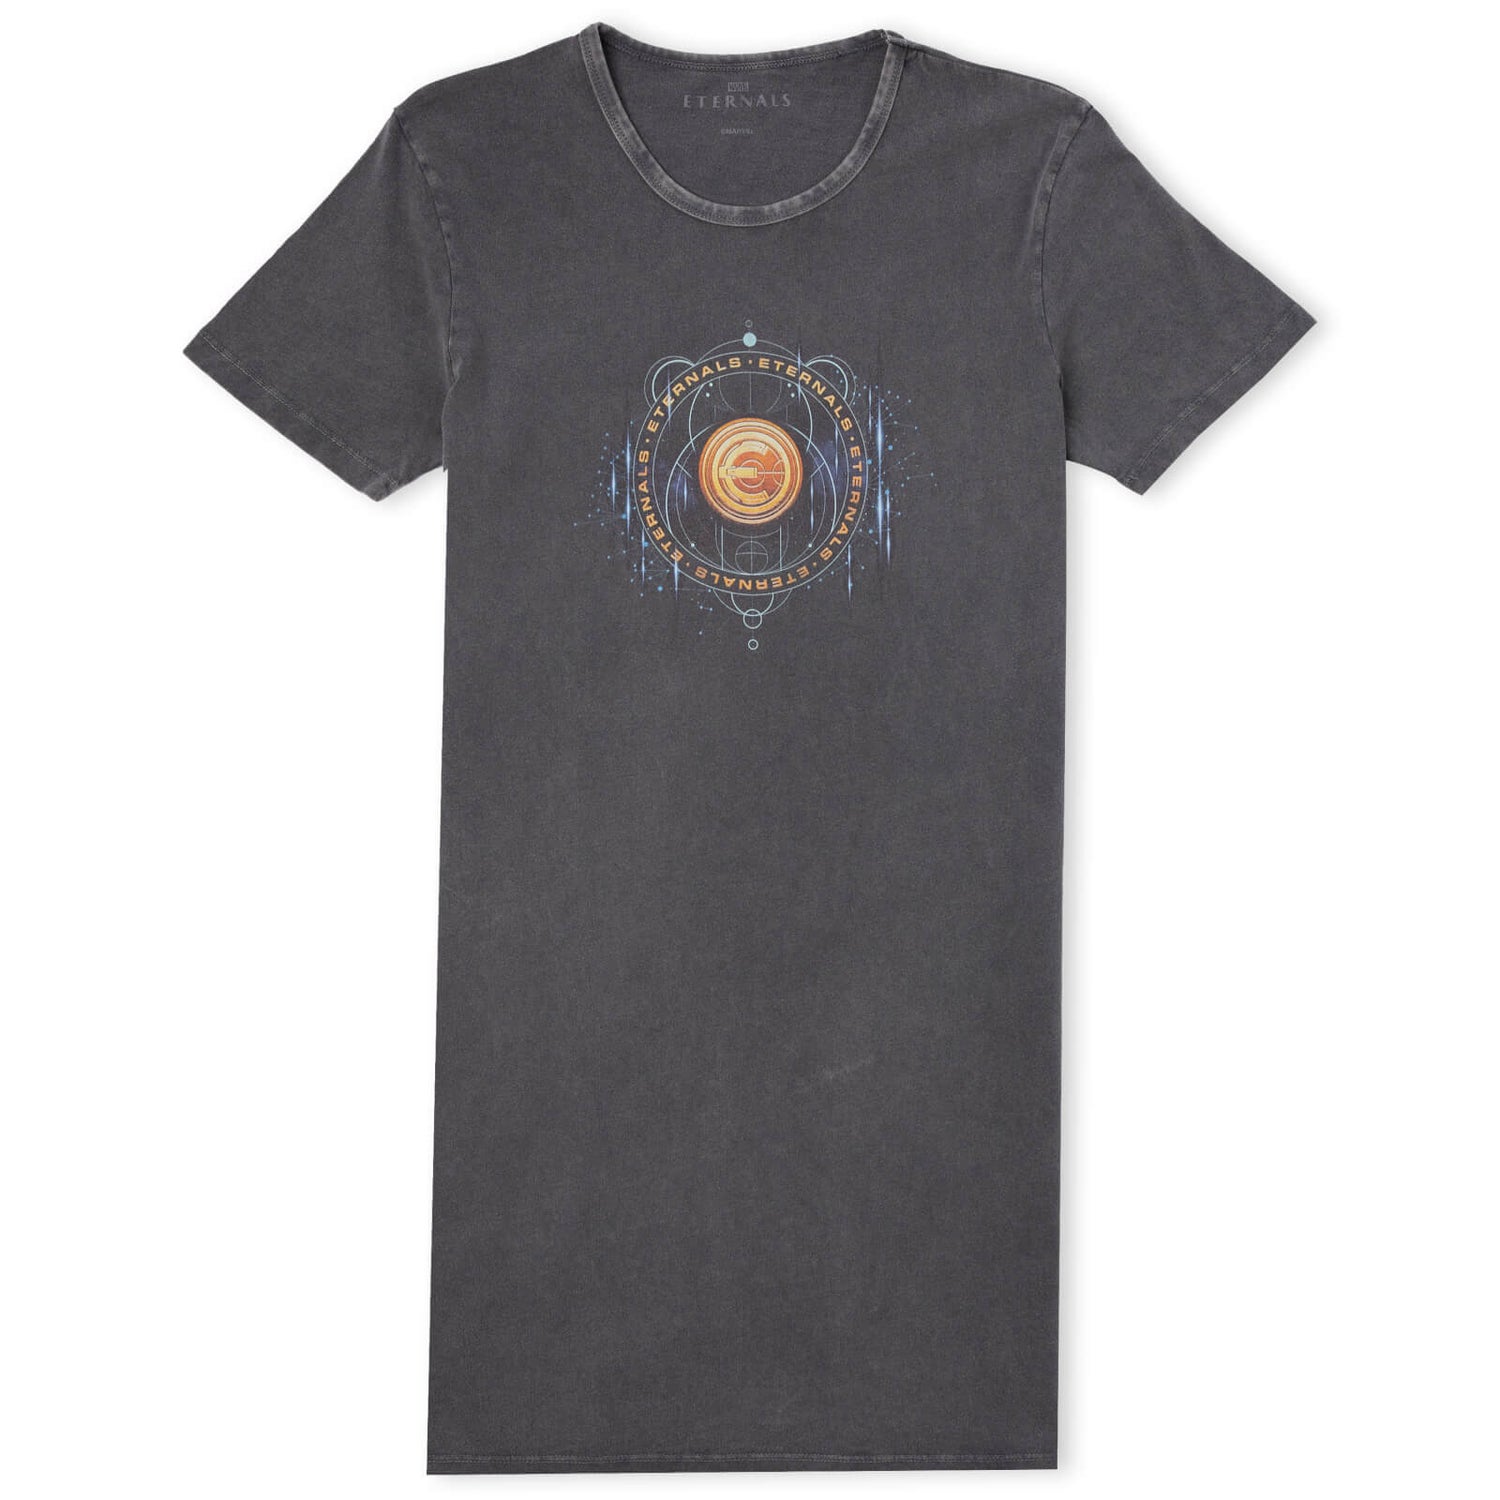 Marvel Eternals Gold Ring With Constellations Women's T-Shirt Dress - Black Acid Wash